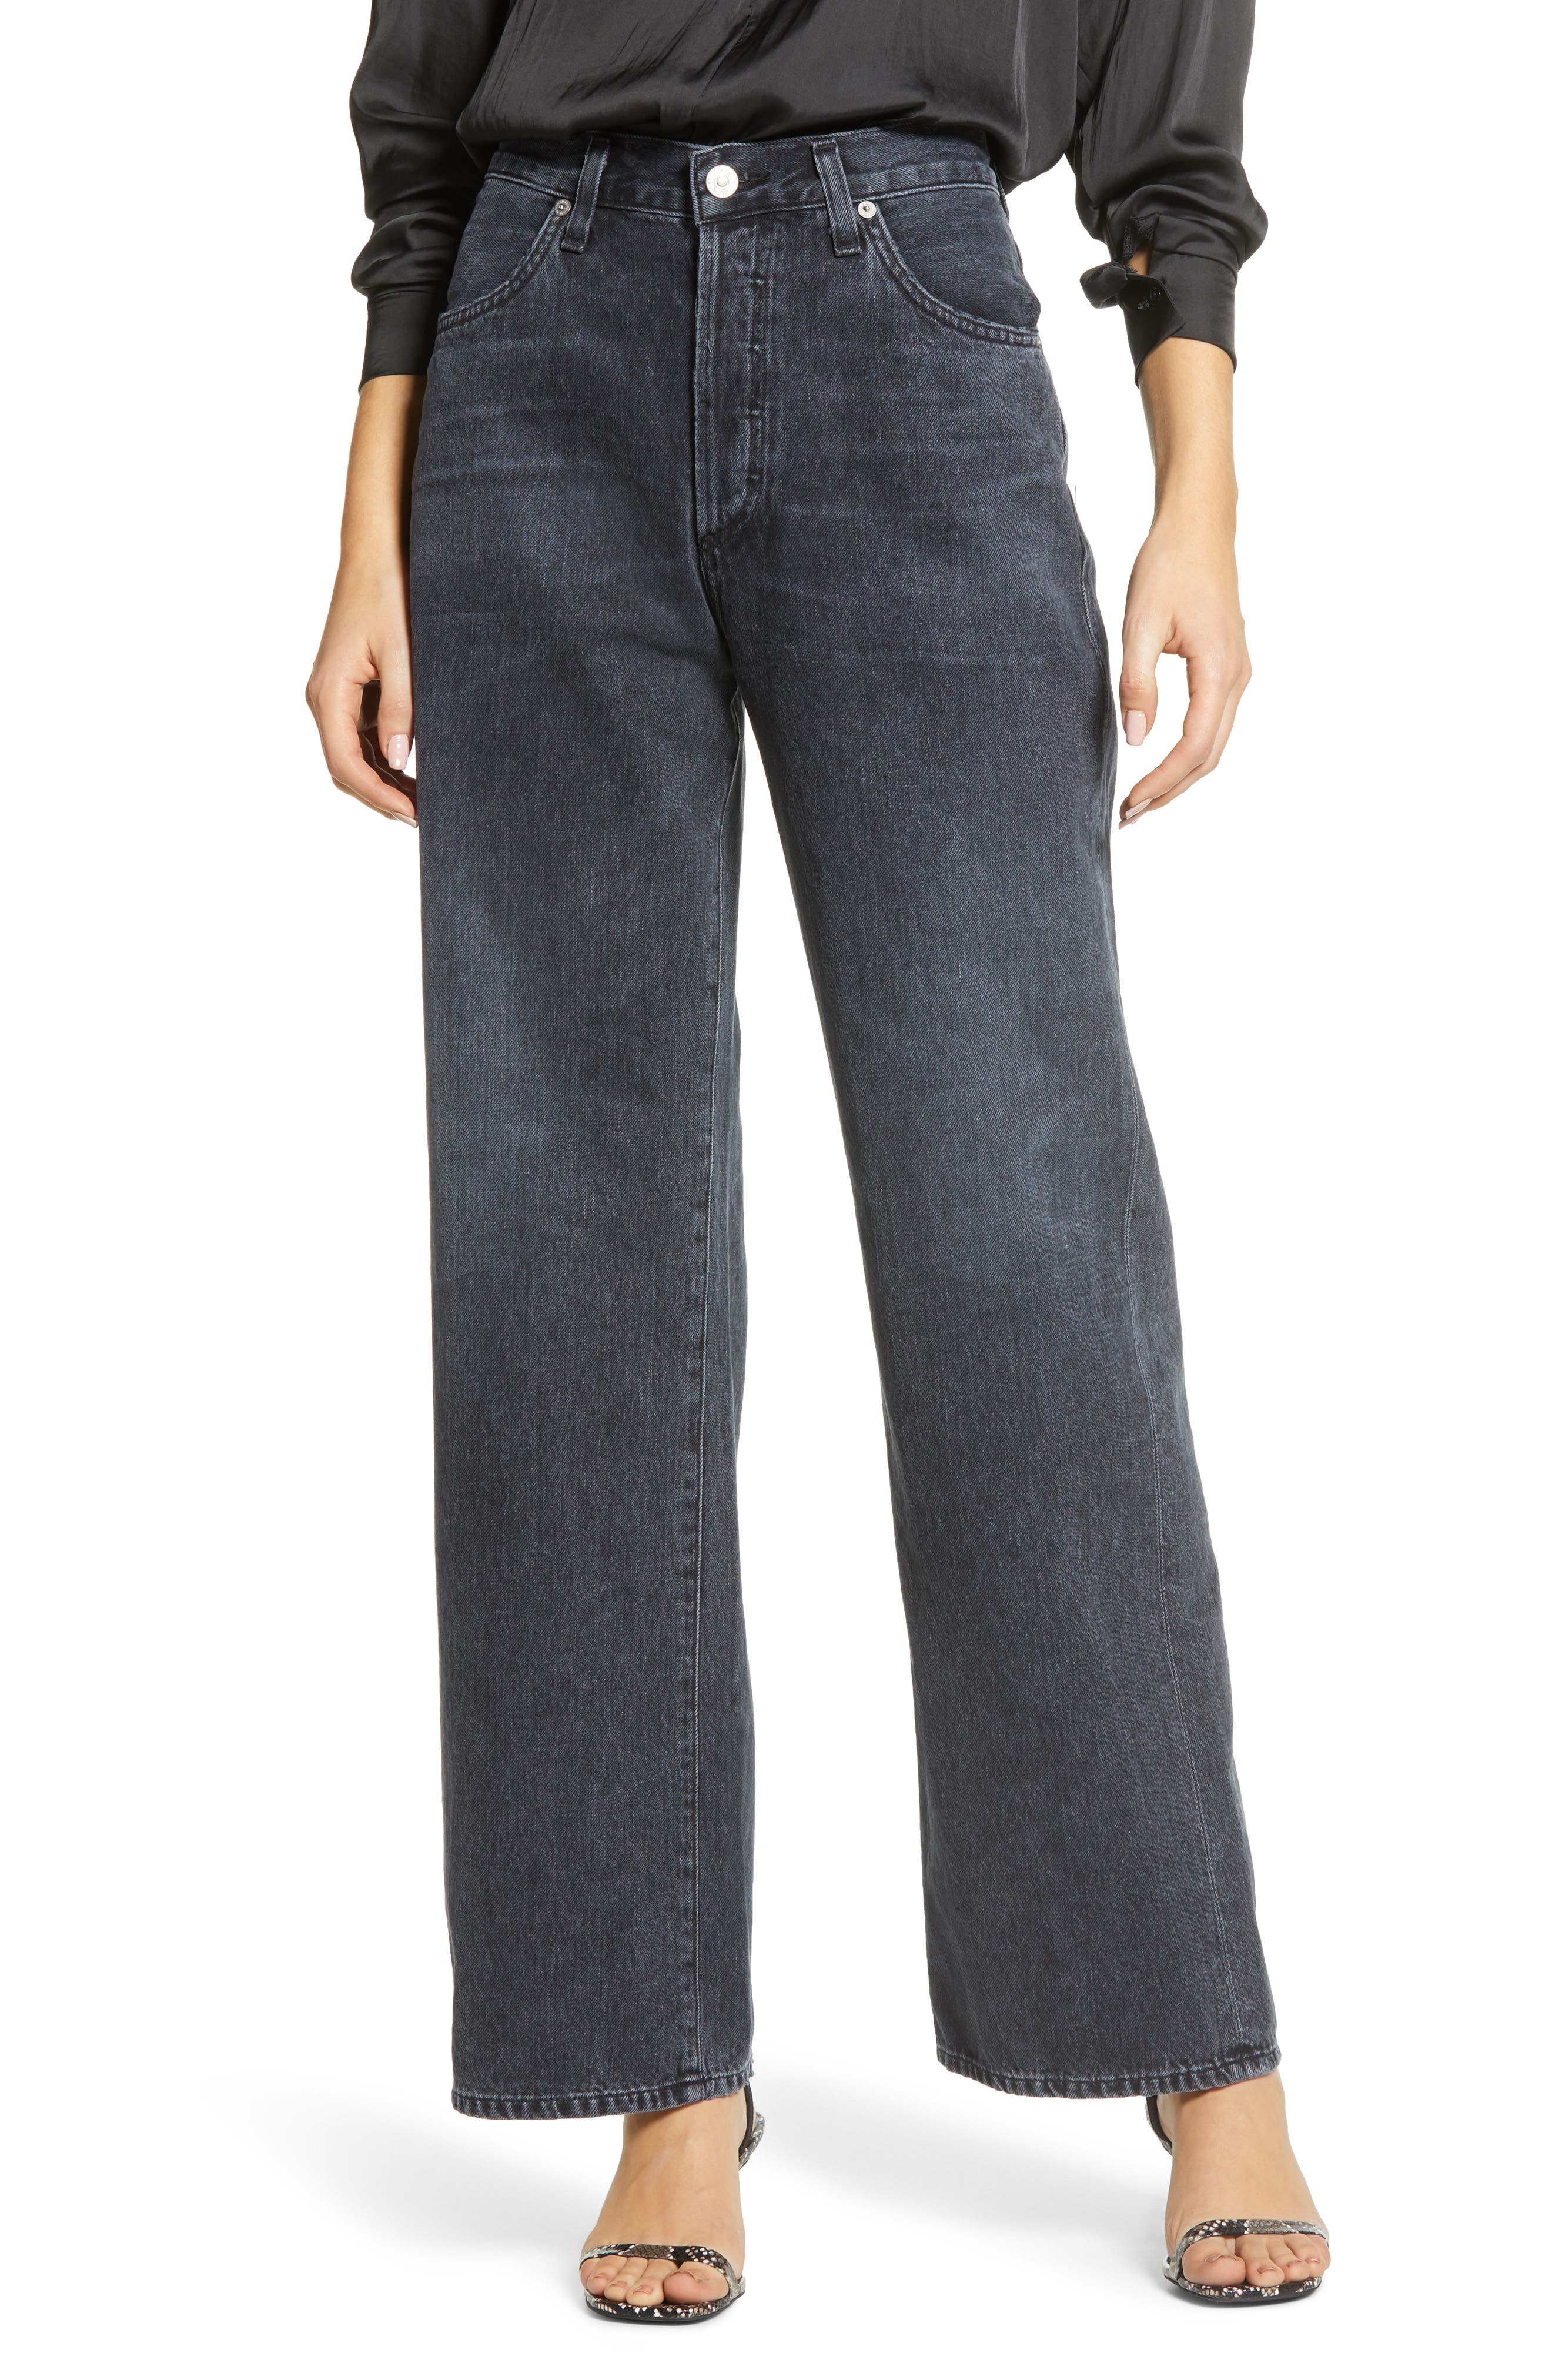 citizens of humanity flavie trouser jeans